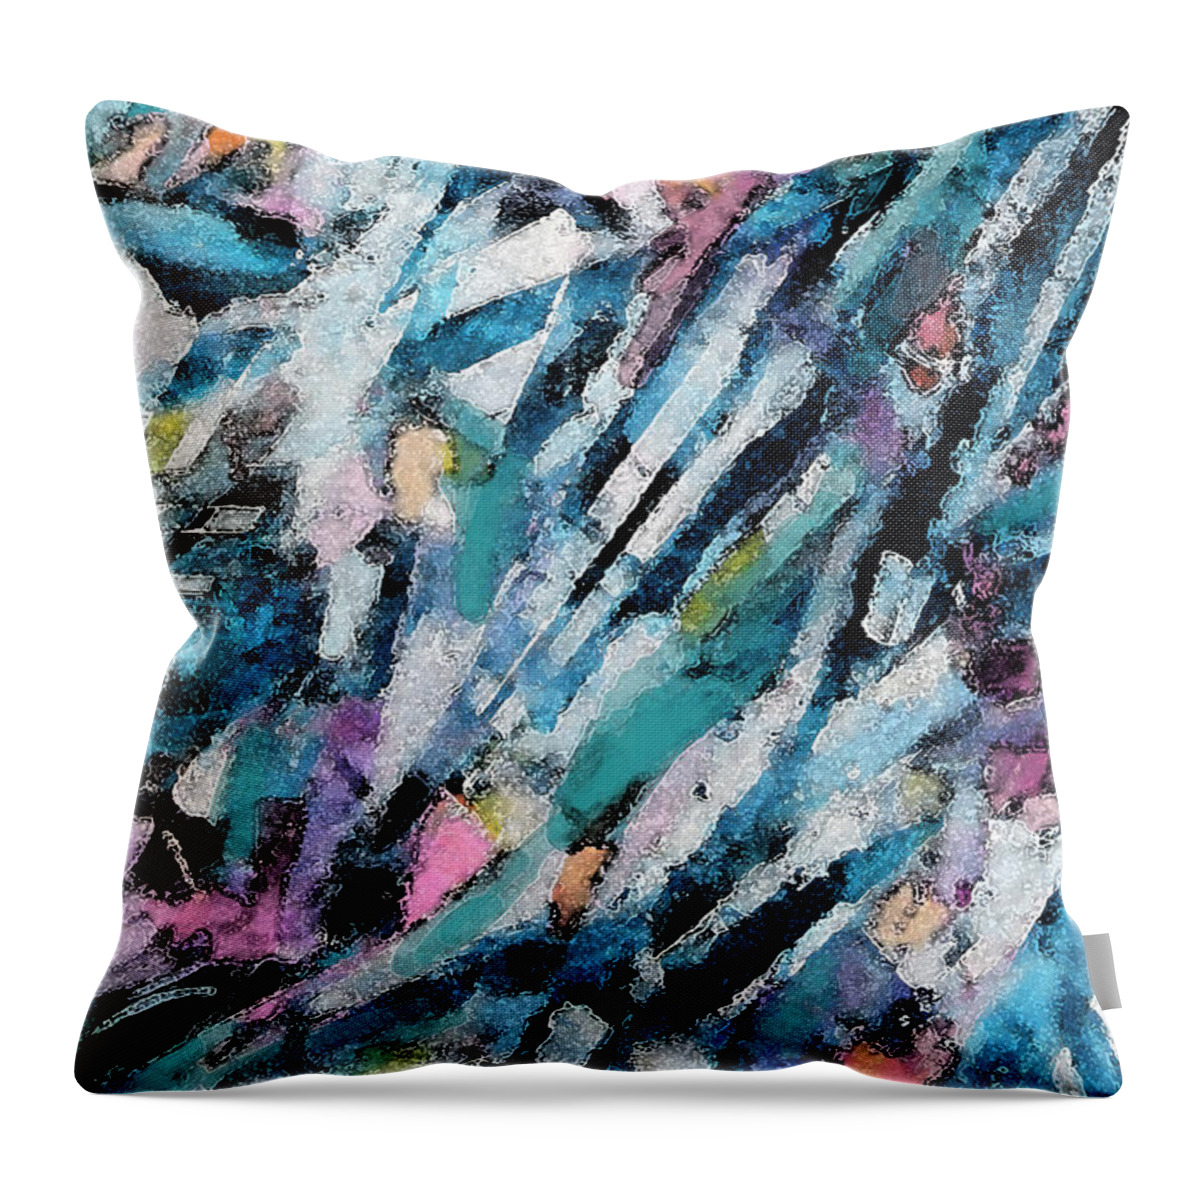 Colorful Abstract Throw Pillow featuring the mixed media Early Morning Walk by Jean Batzell Fitzgerald